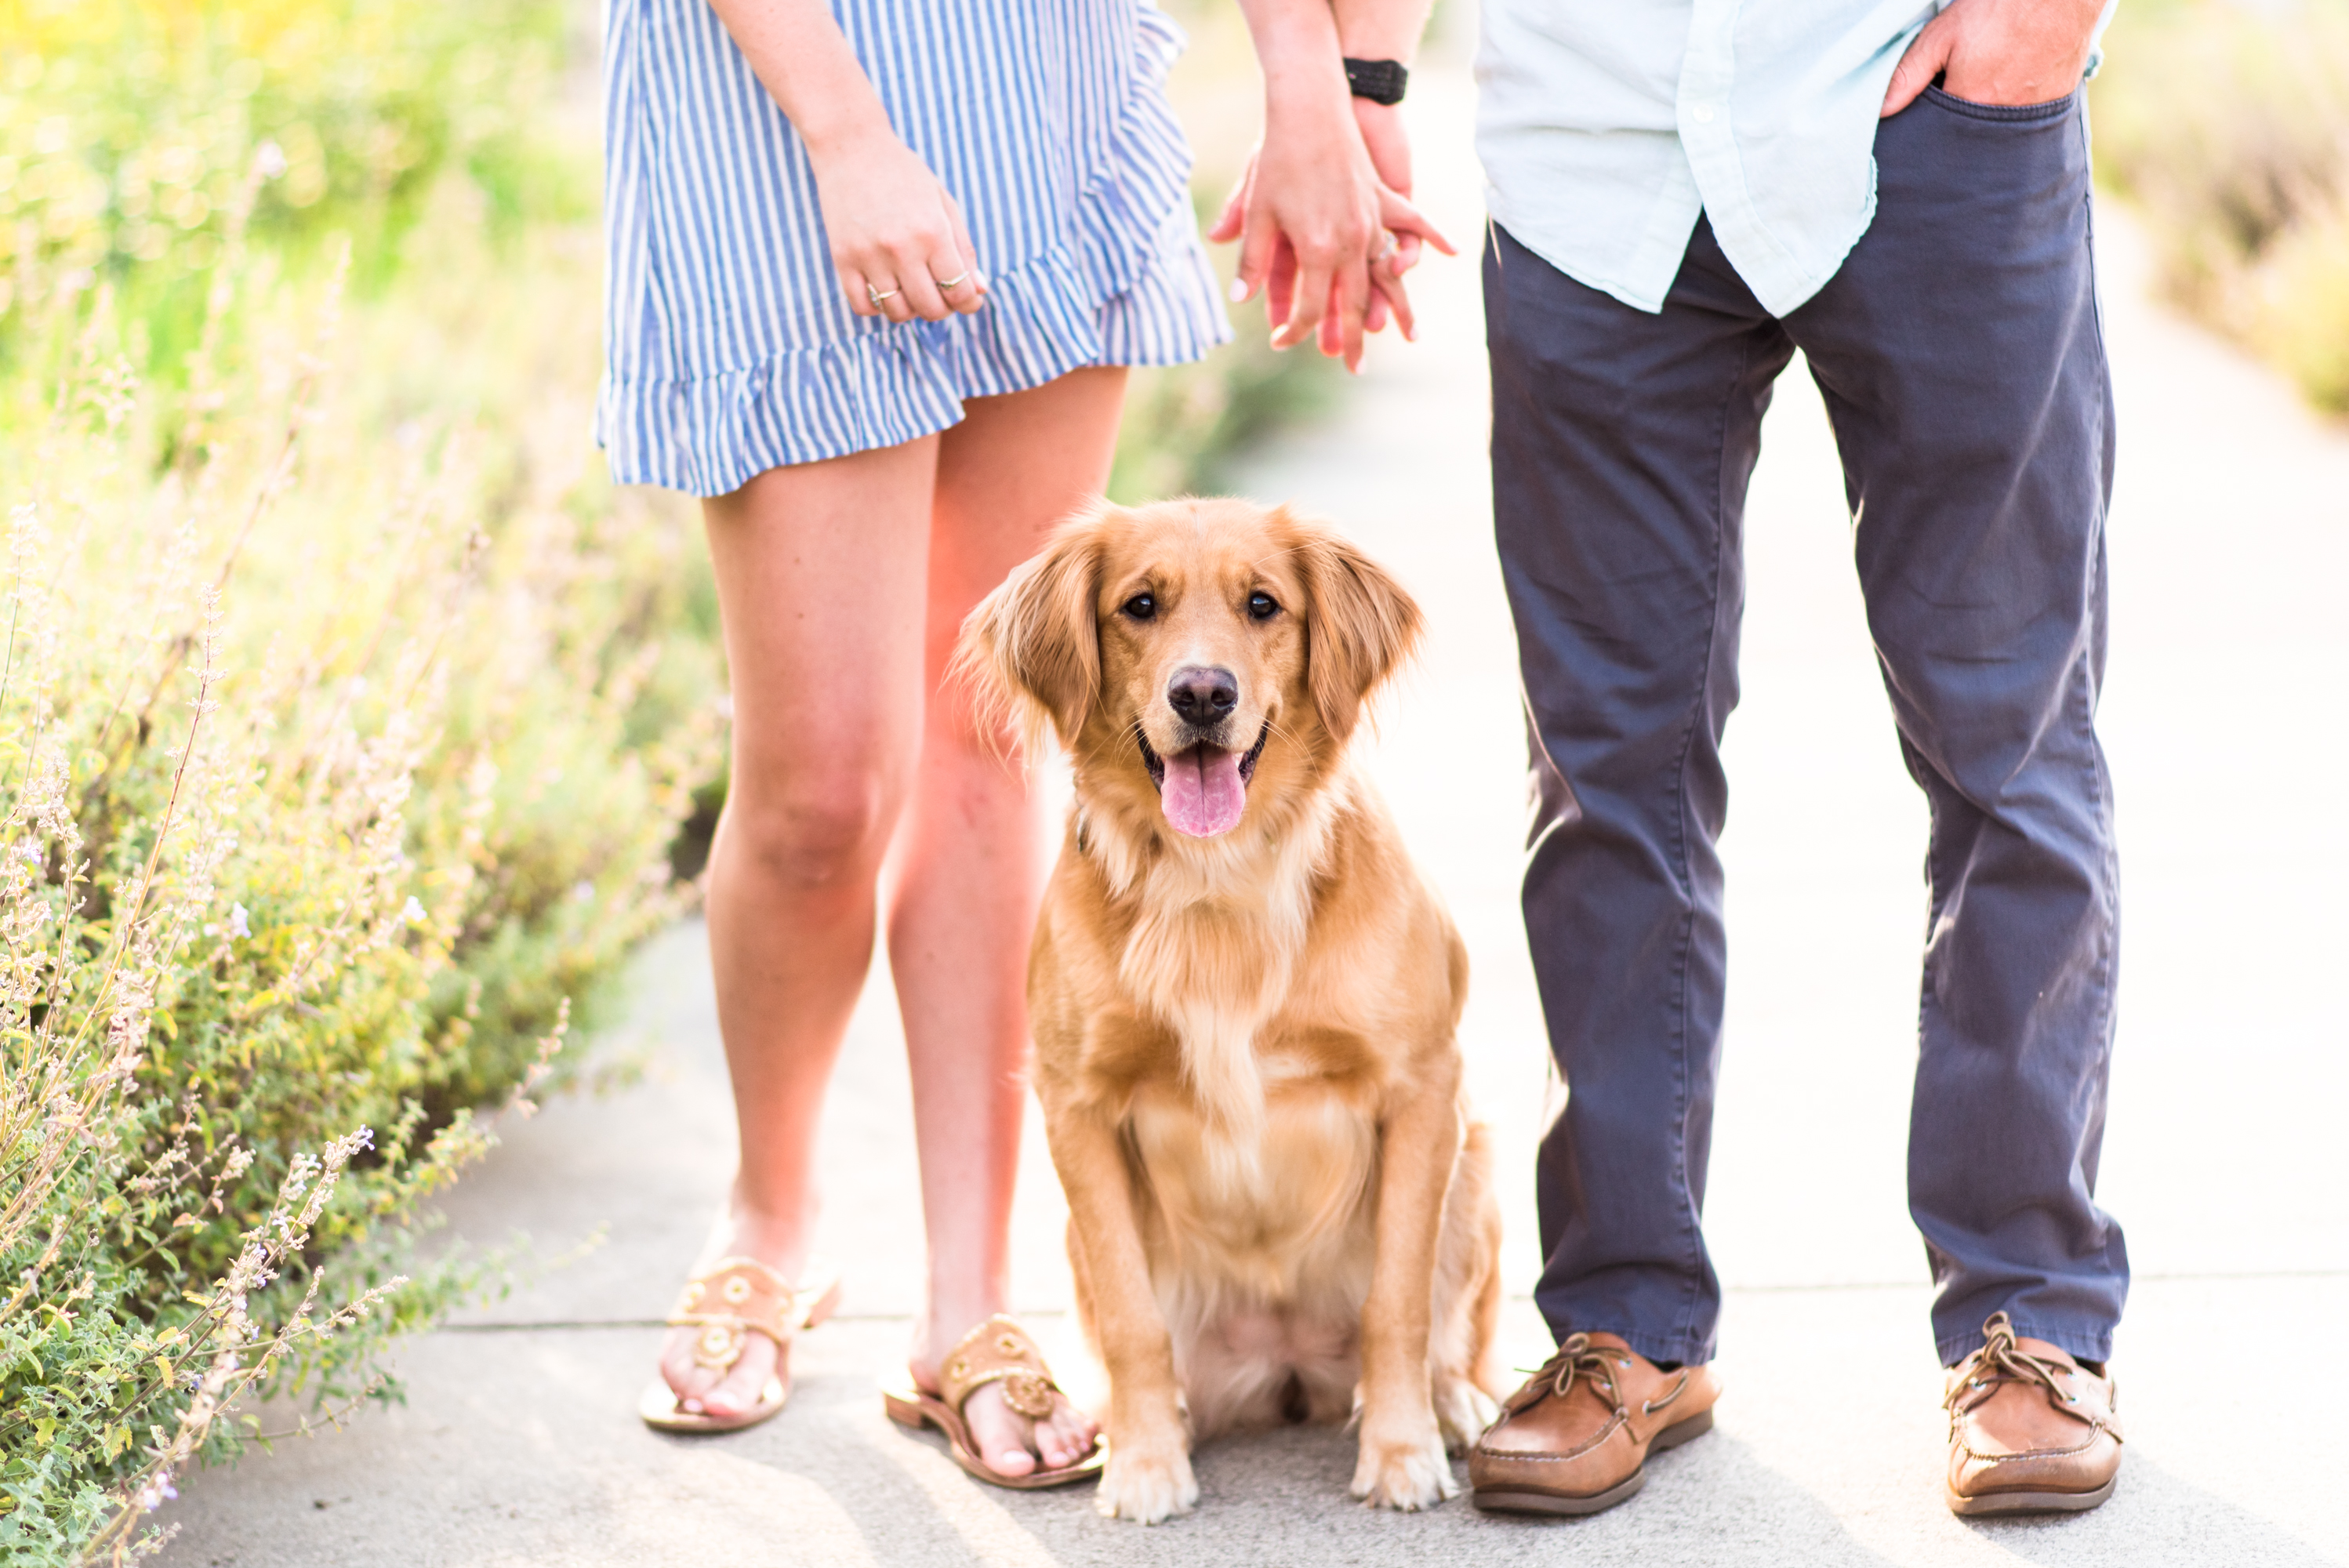 How to Include Your Dog Engagement Photos